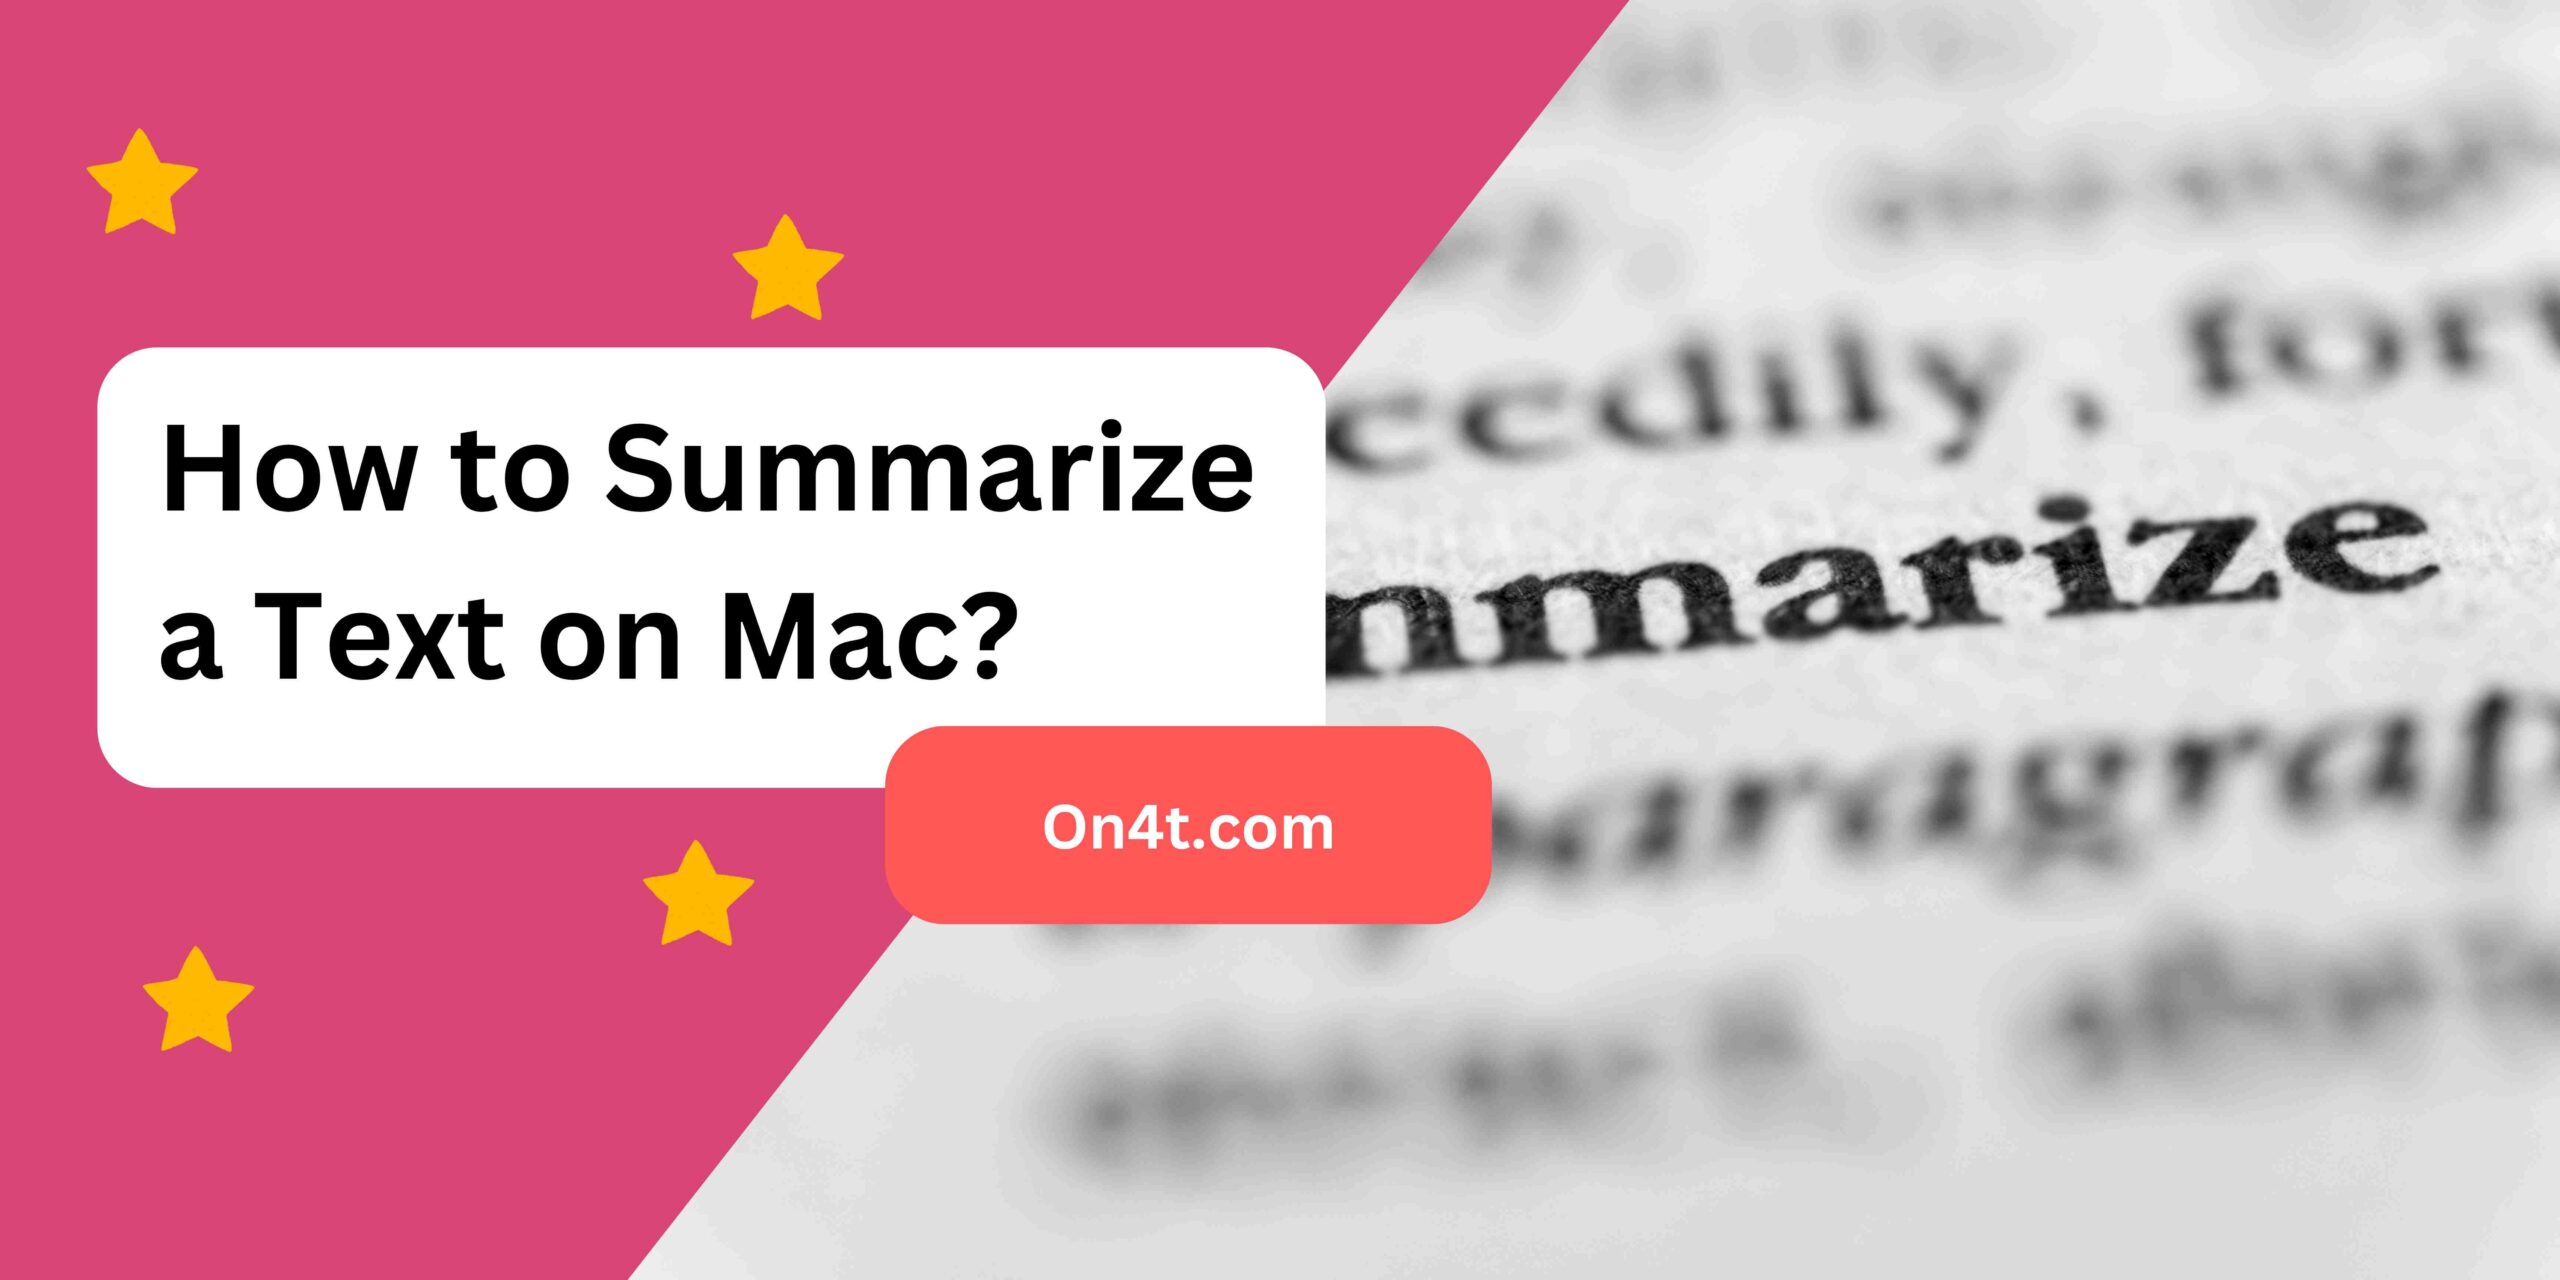 How to Summarize a Text on Mac